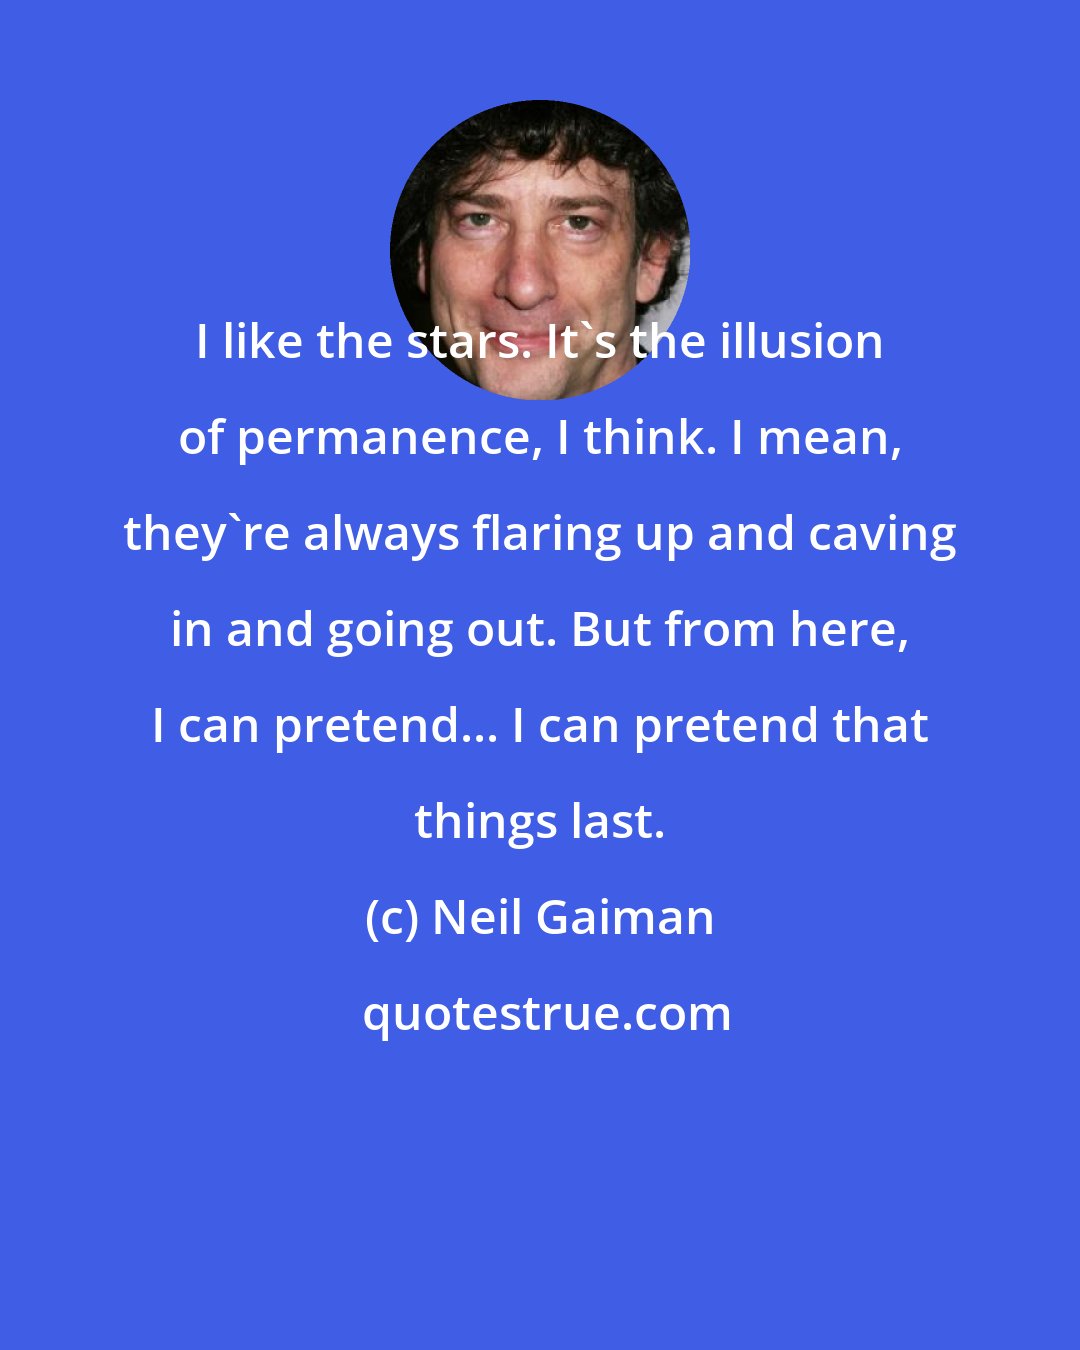 Neil Gaiman: I like the stars. It's the illusion of permanence, I think. I mean, they're always flaring up and caving in and going out. But from here, I can pretend... I can pretend that things last.